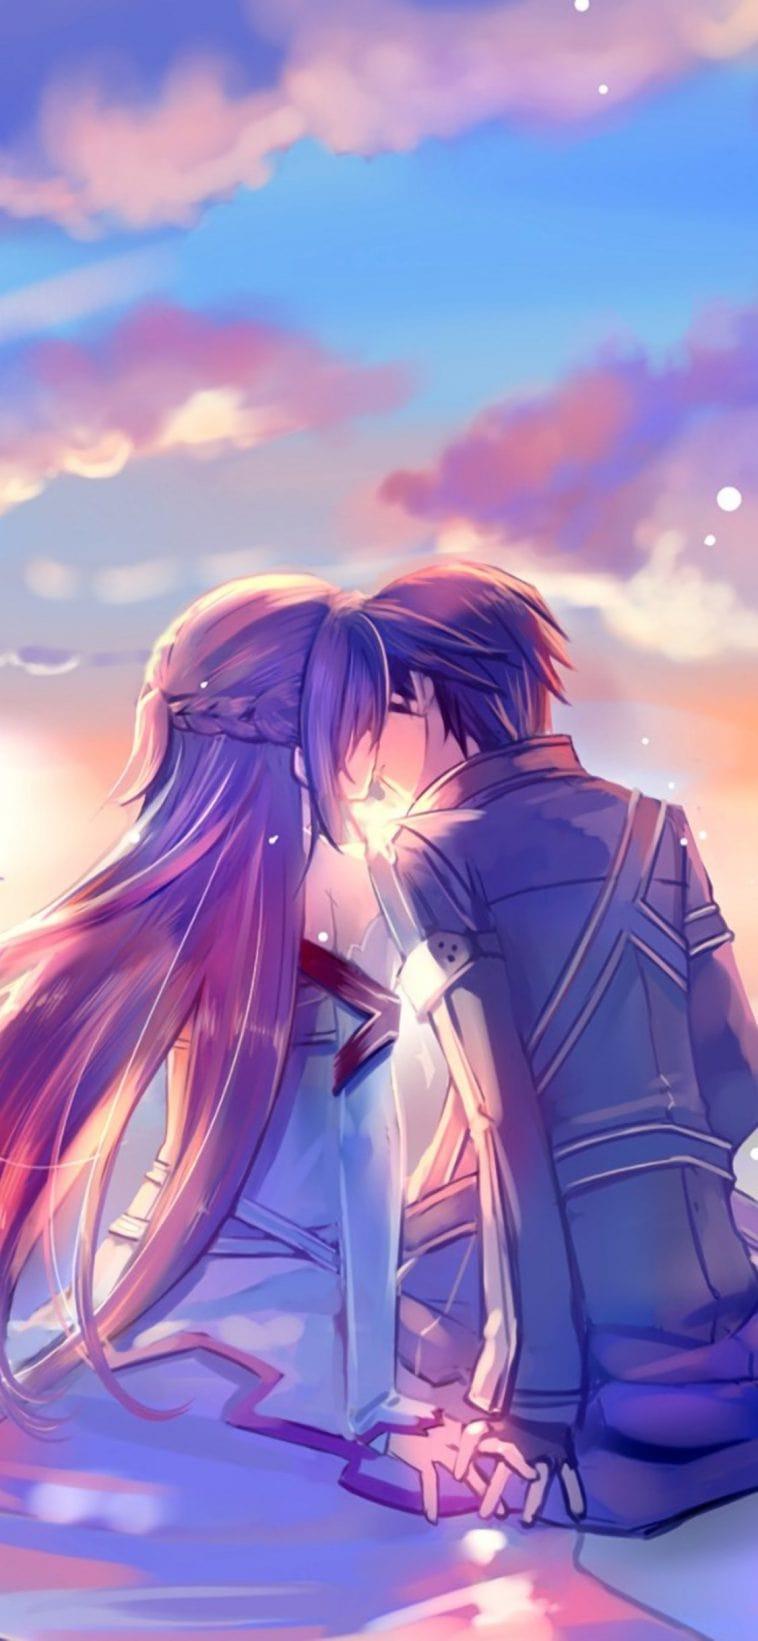 Anime Couple Pic Wallpapers